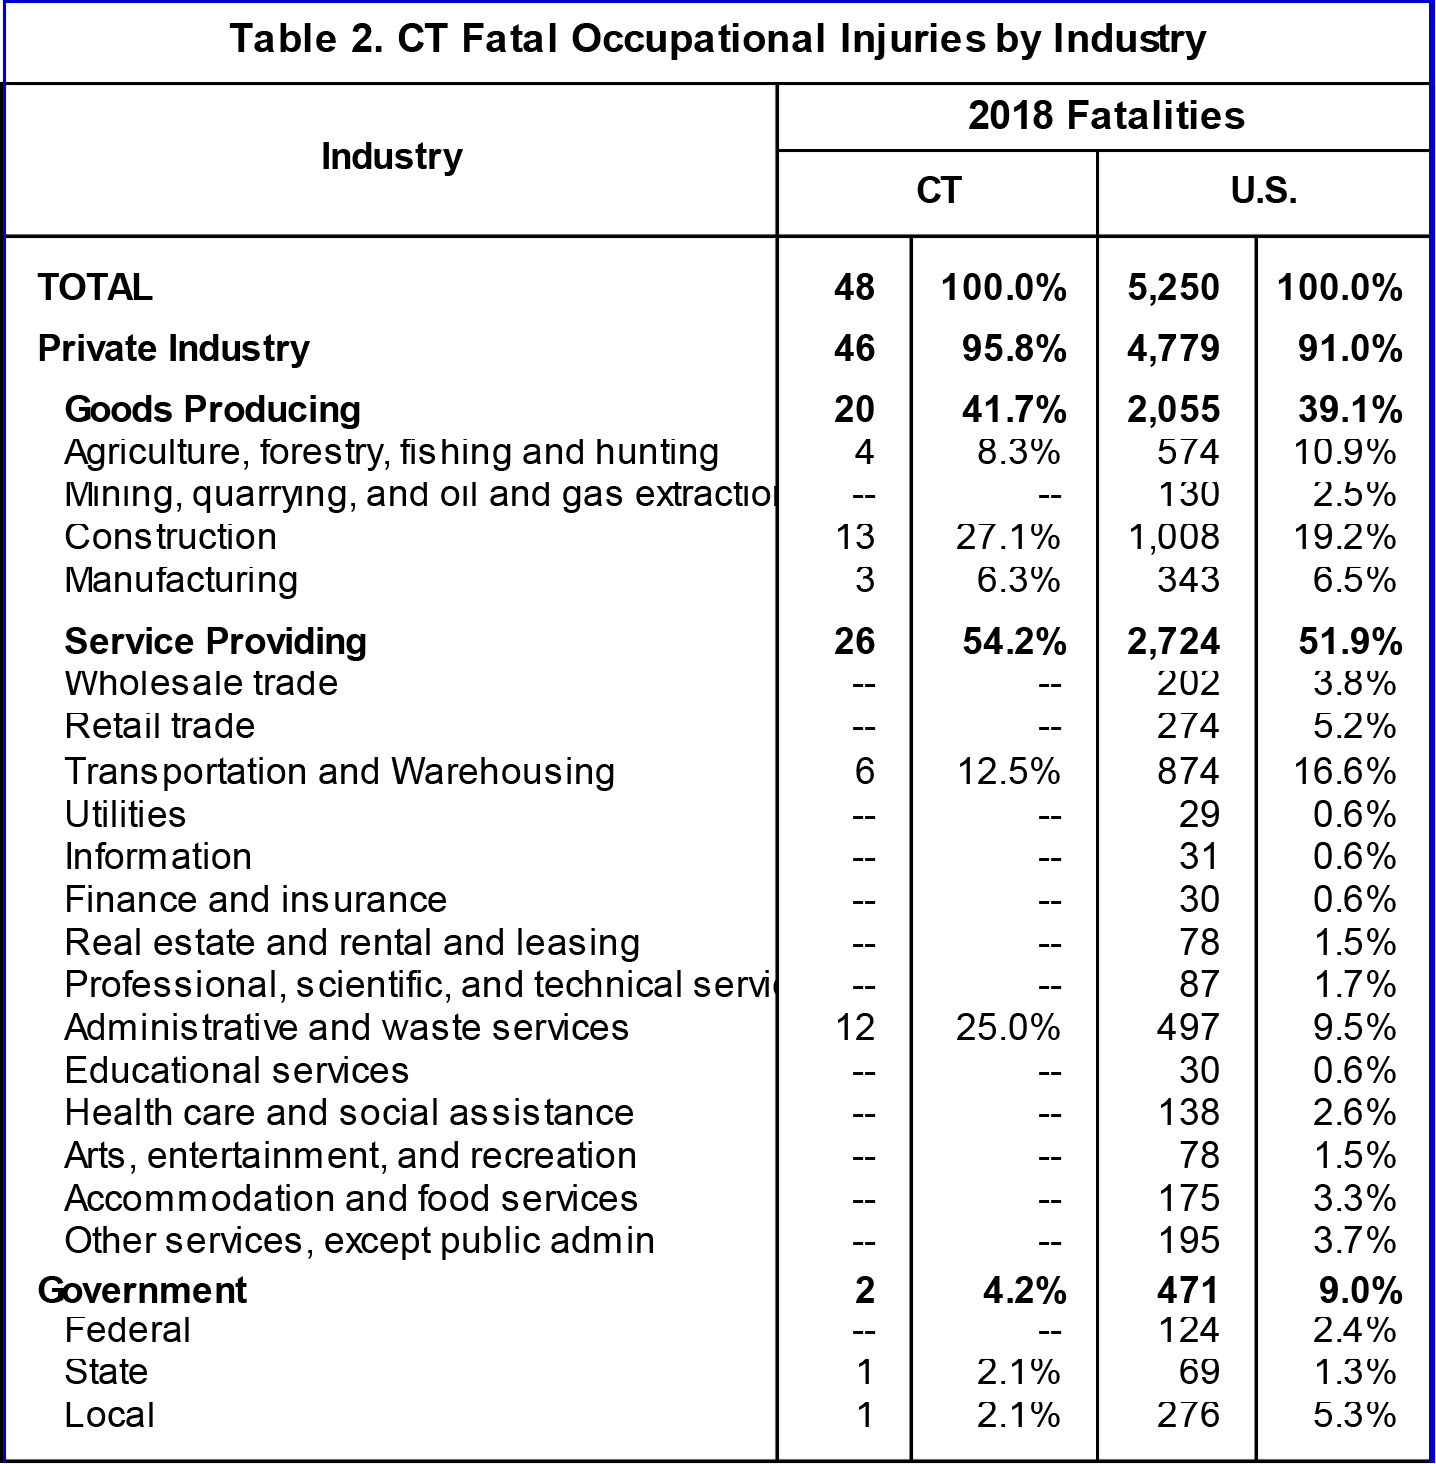 Table 2. CT Fatal Occupational Injuries by Industry